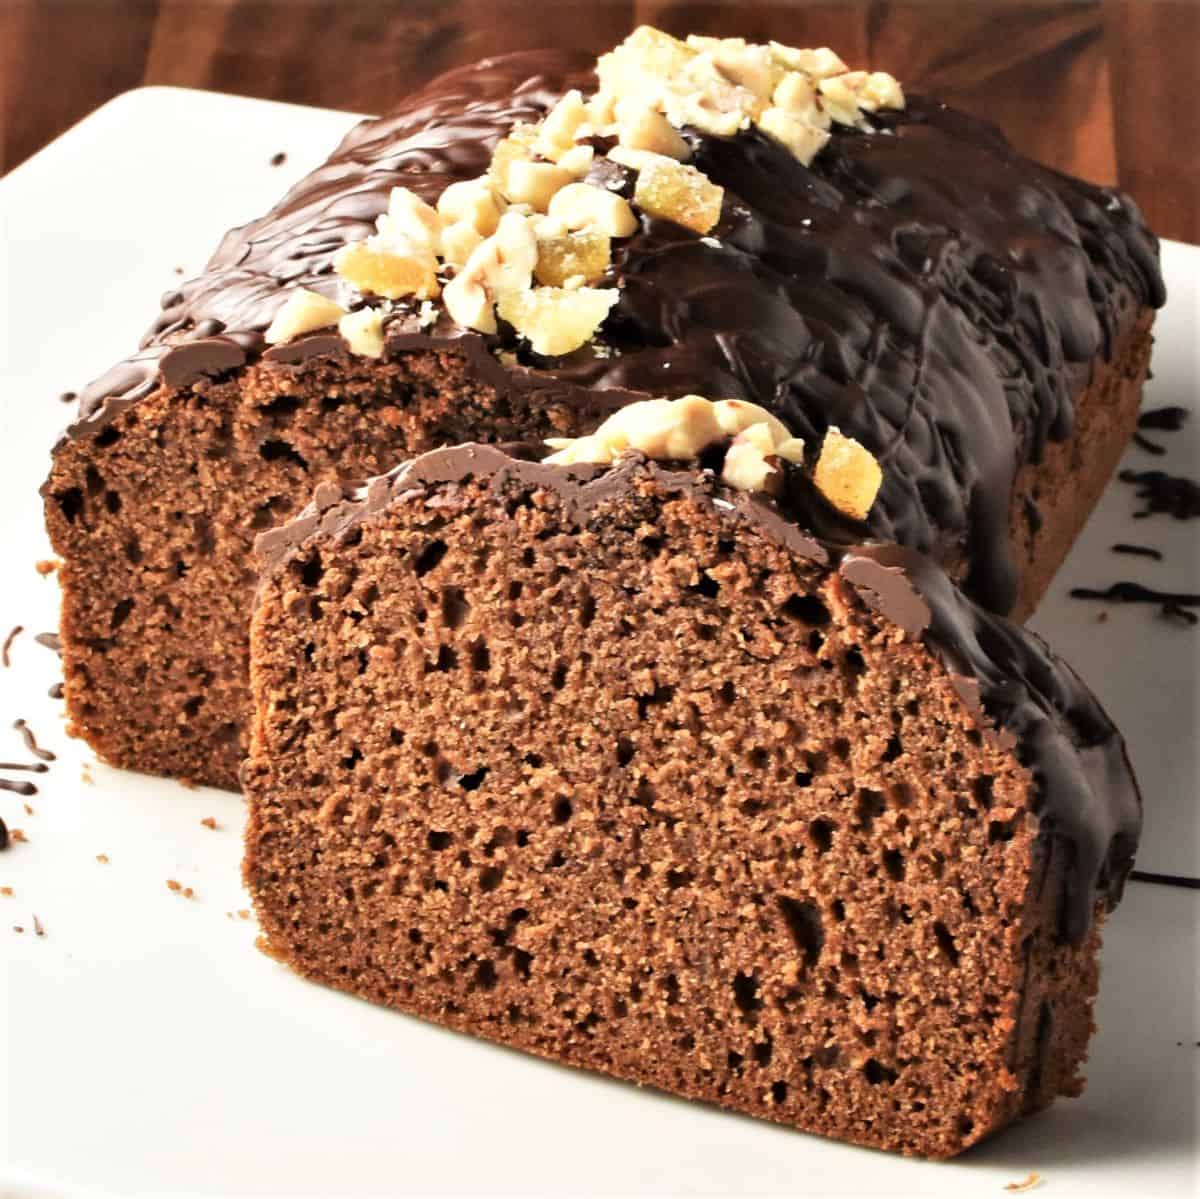 Side view of gingerbread loaf cake topped with chocolate and nuts.